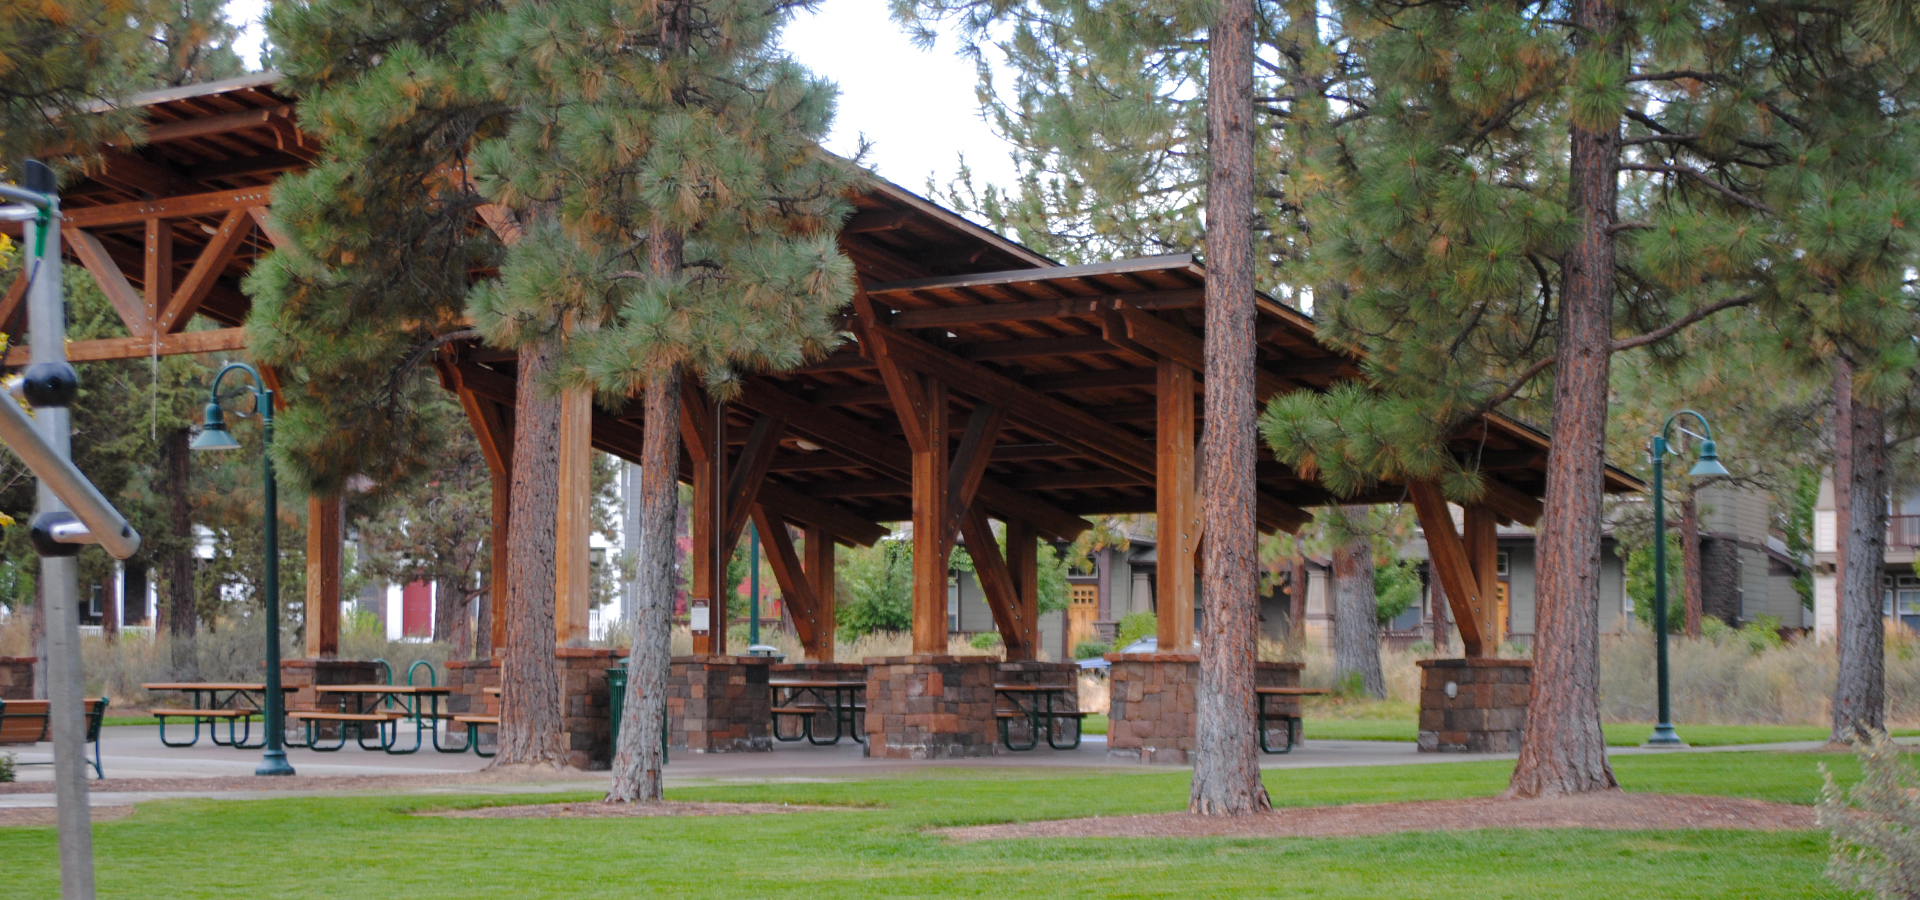 The shelter at Compass Park.